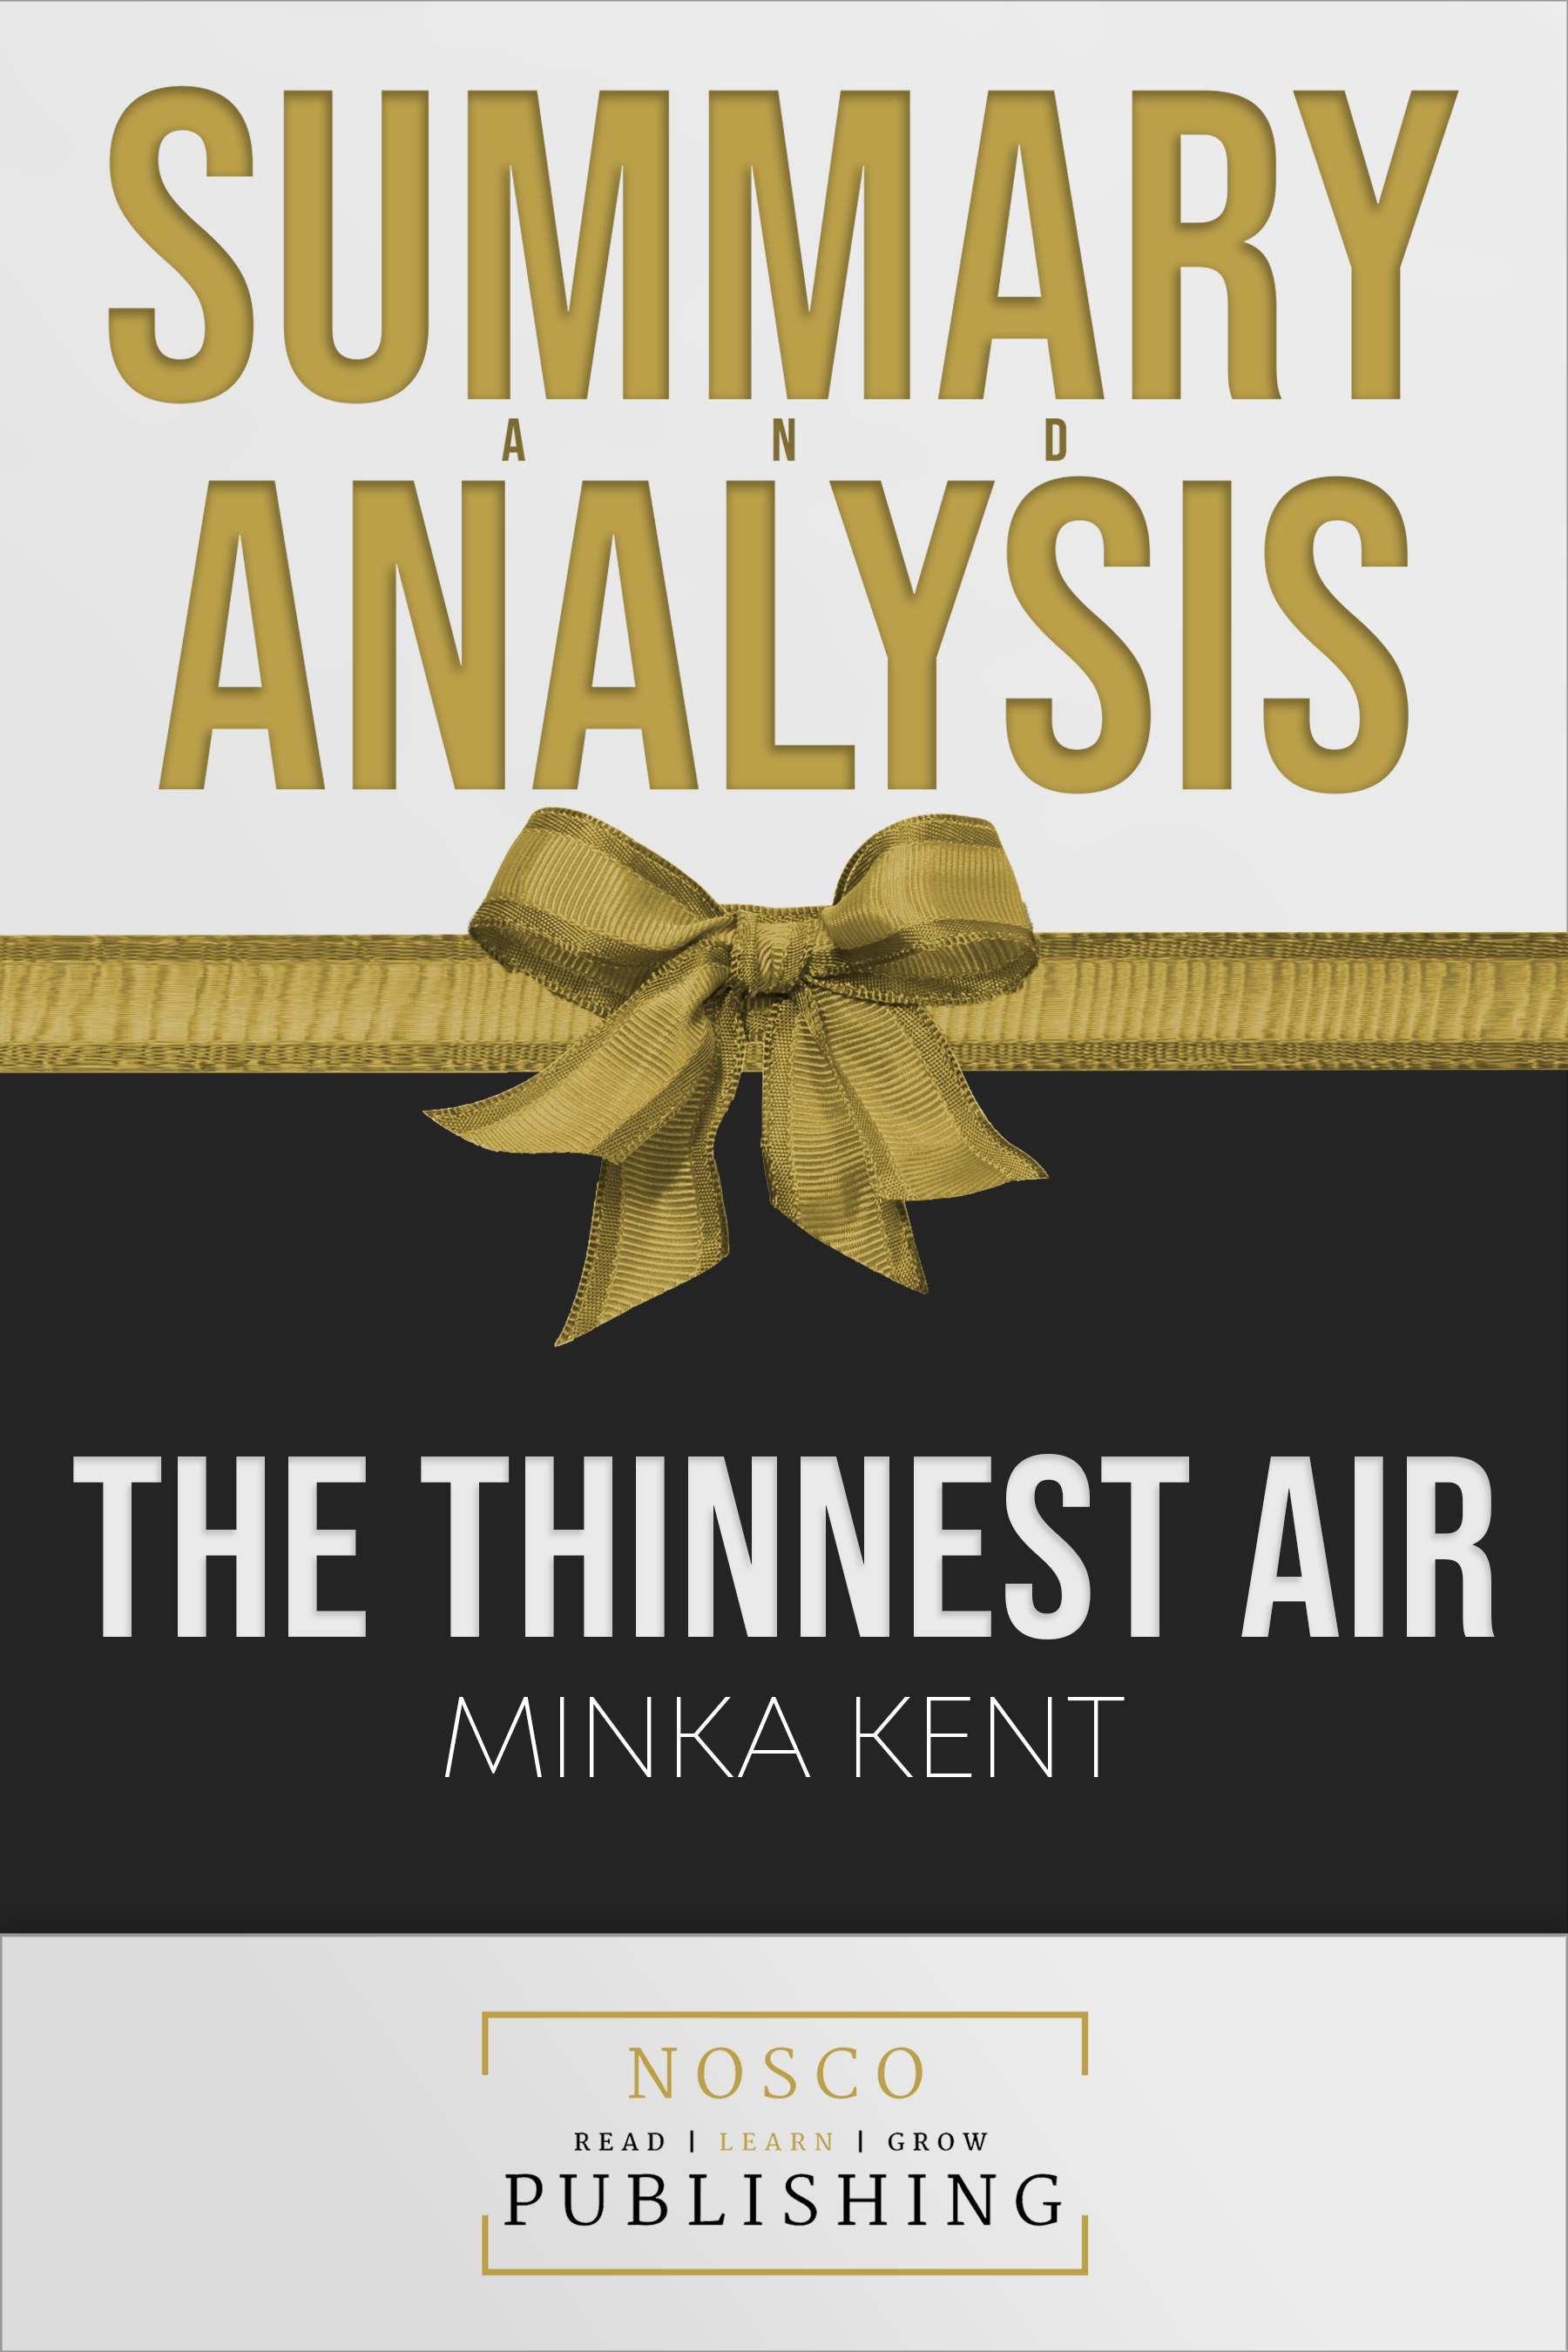 FREE: Summary of The Thinnest Air by Minka Kent by Nosco Publishing